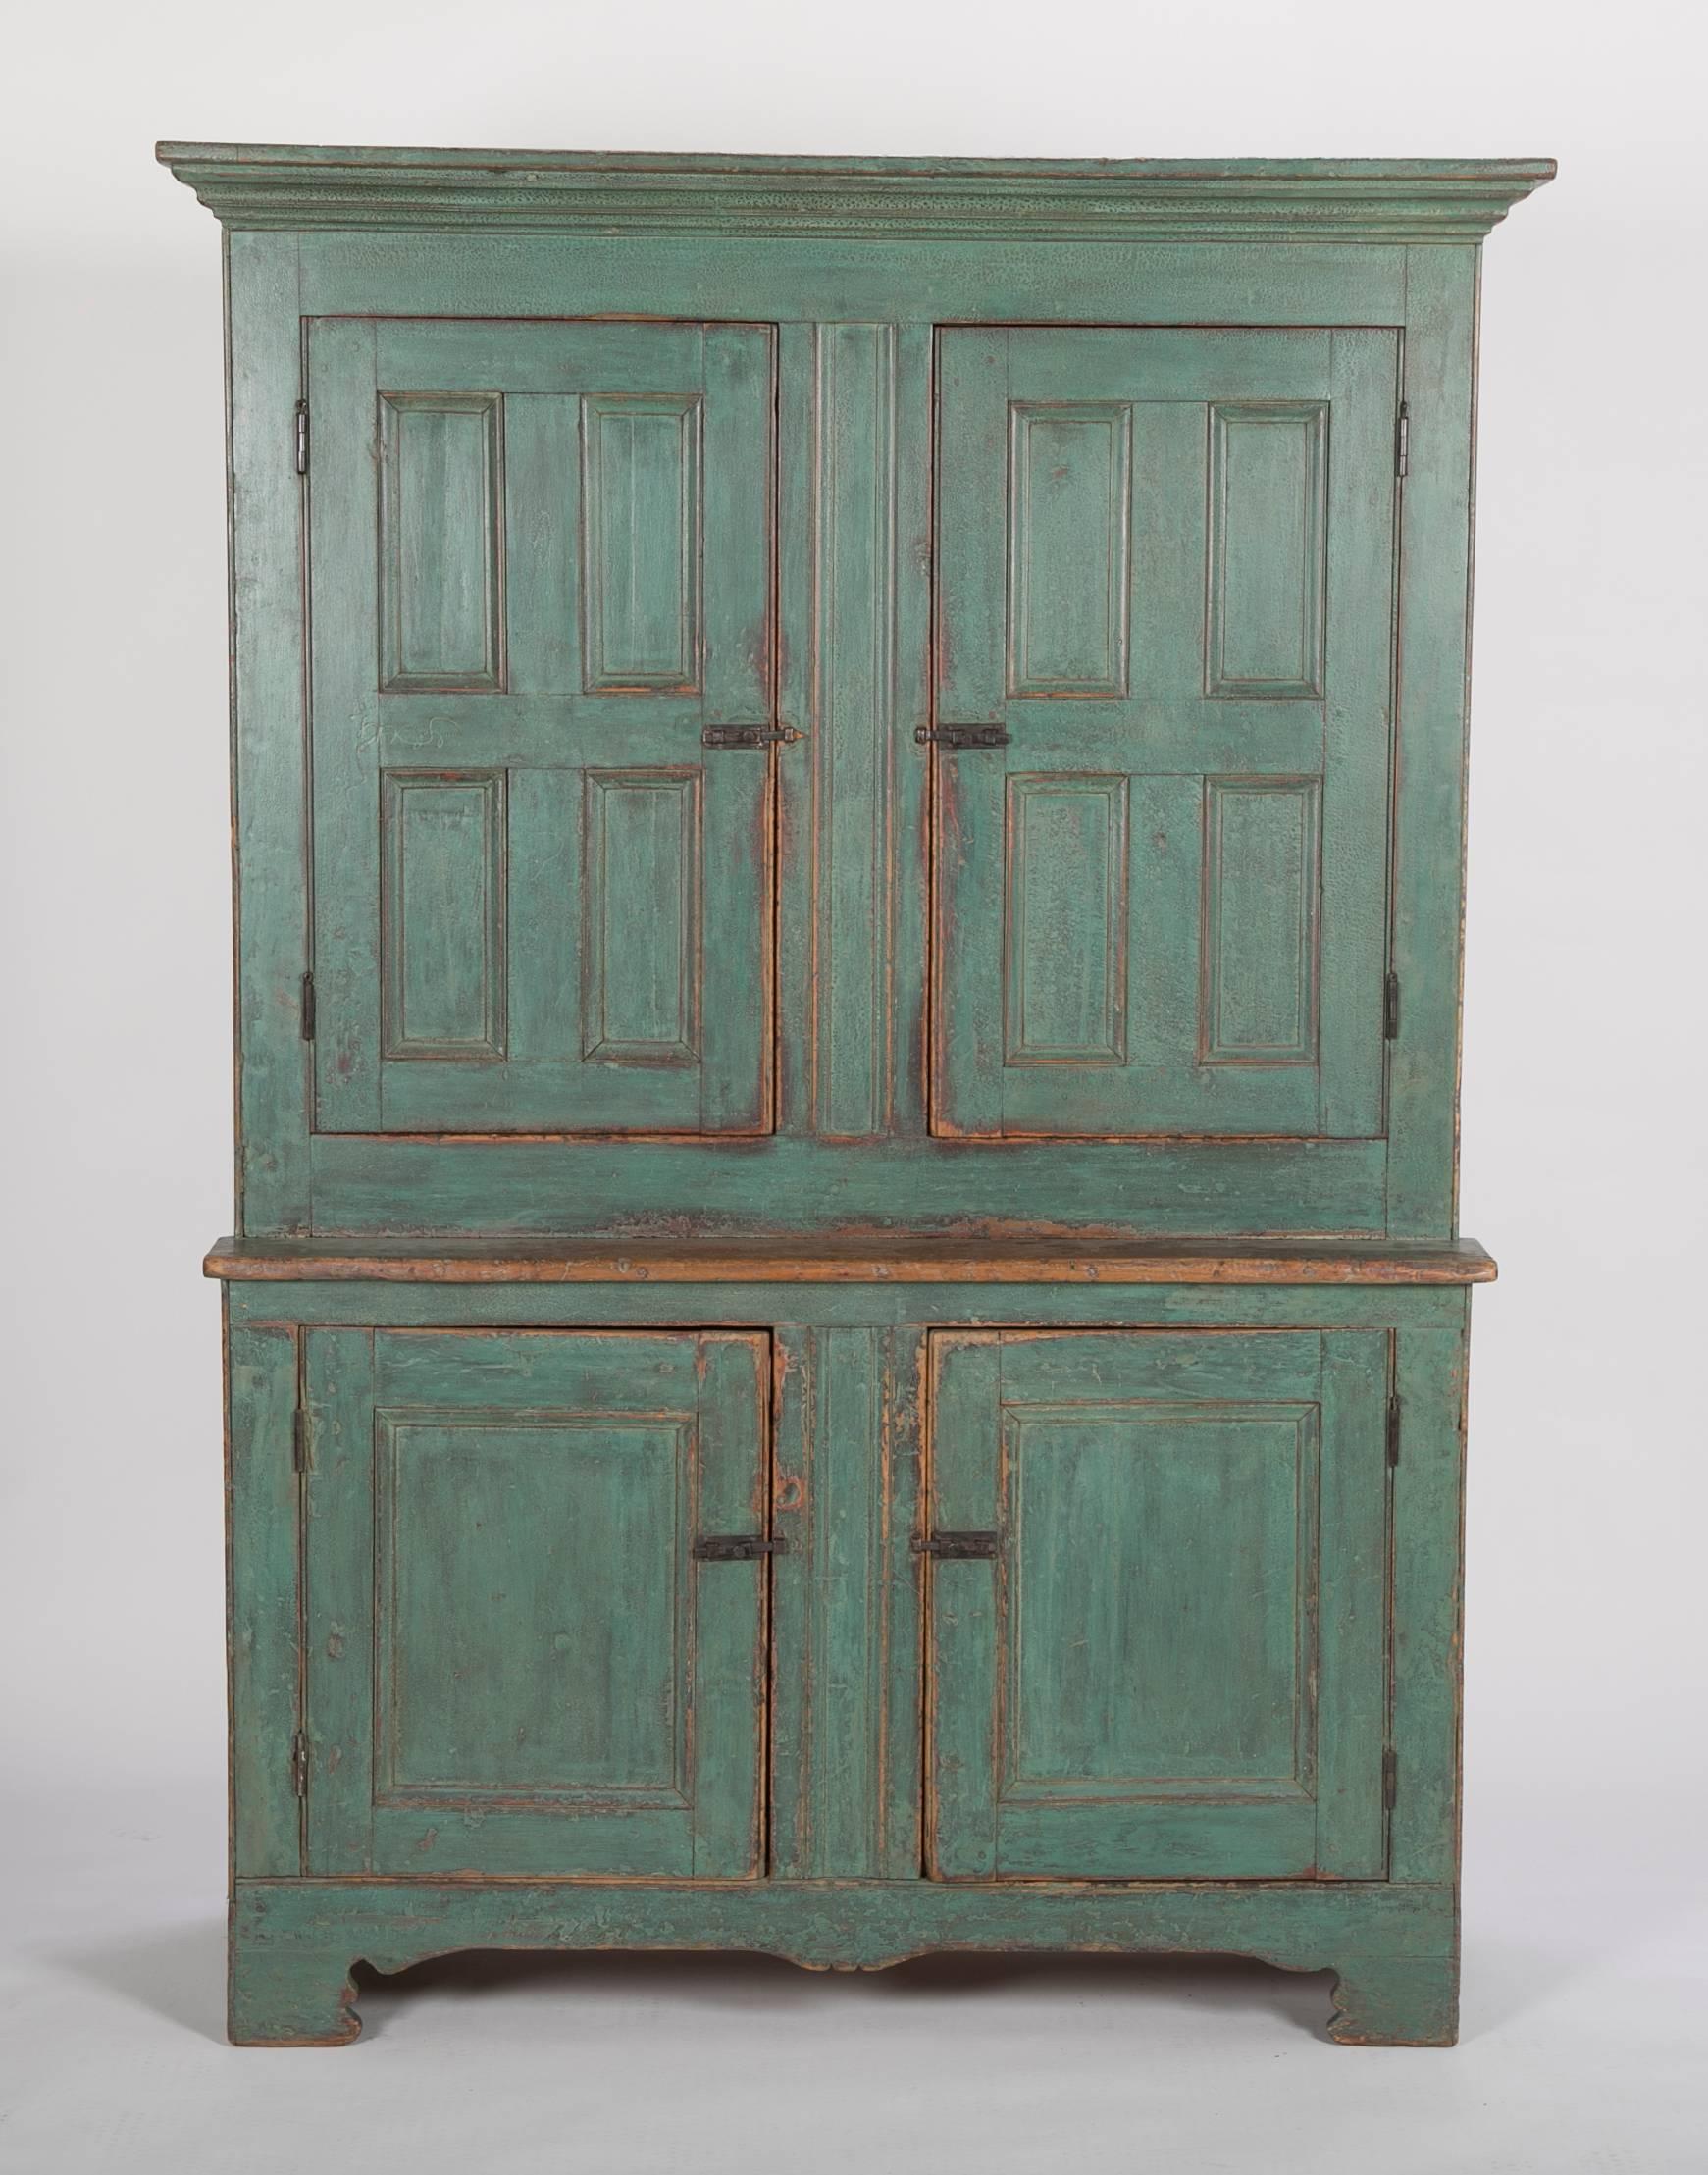 Handsome early American stepback cupboard in blue paint with great patina.